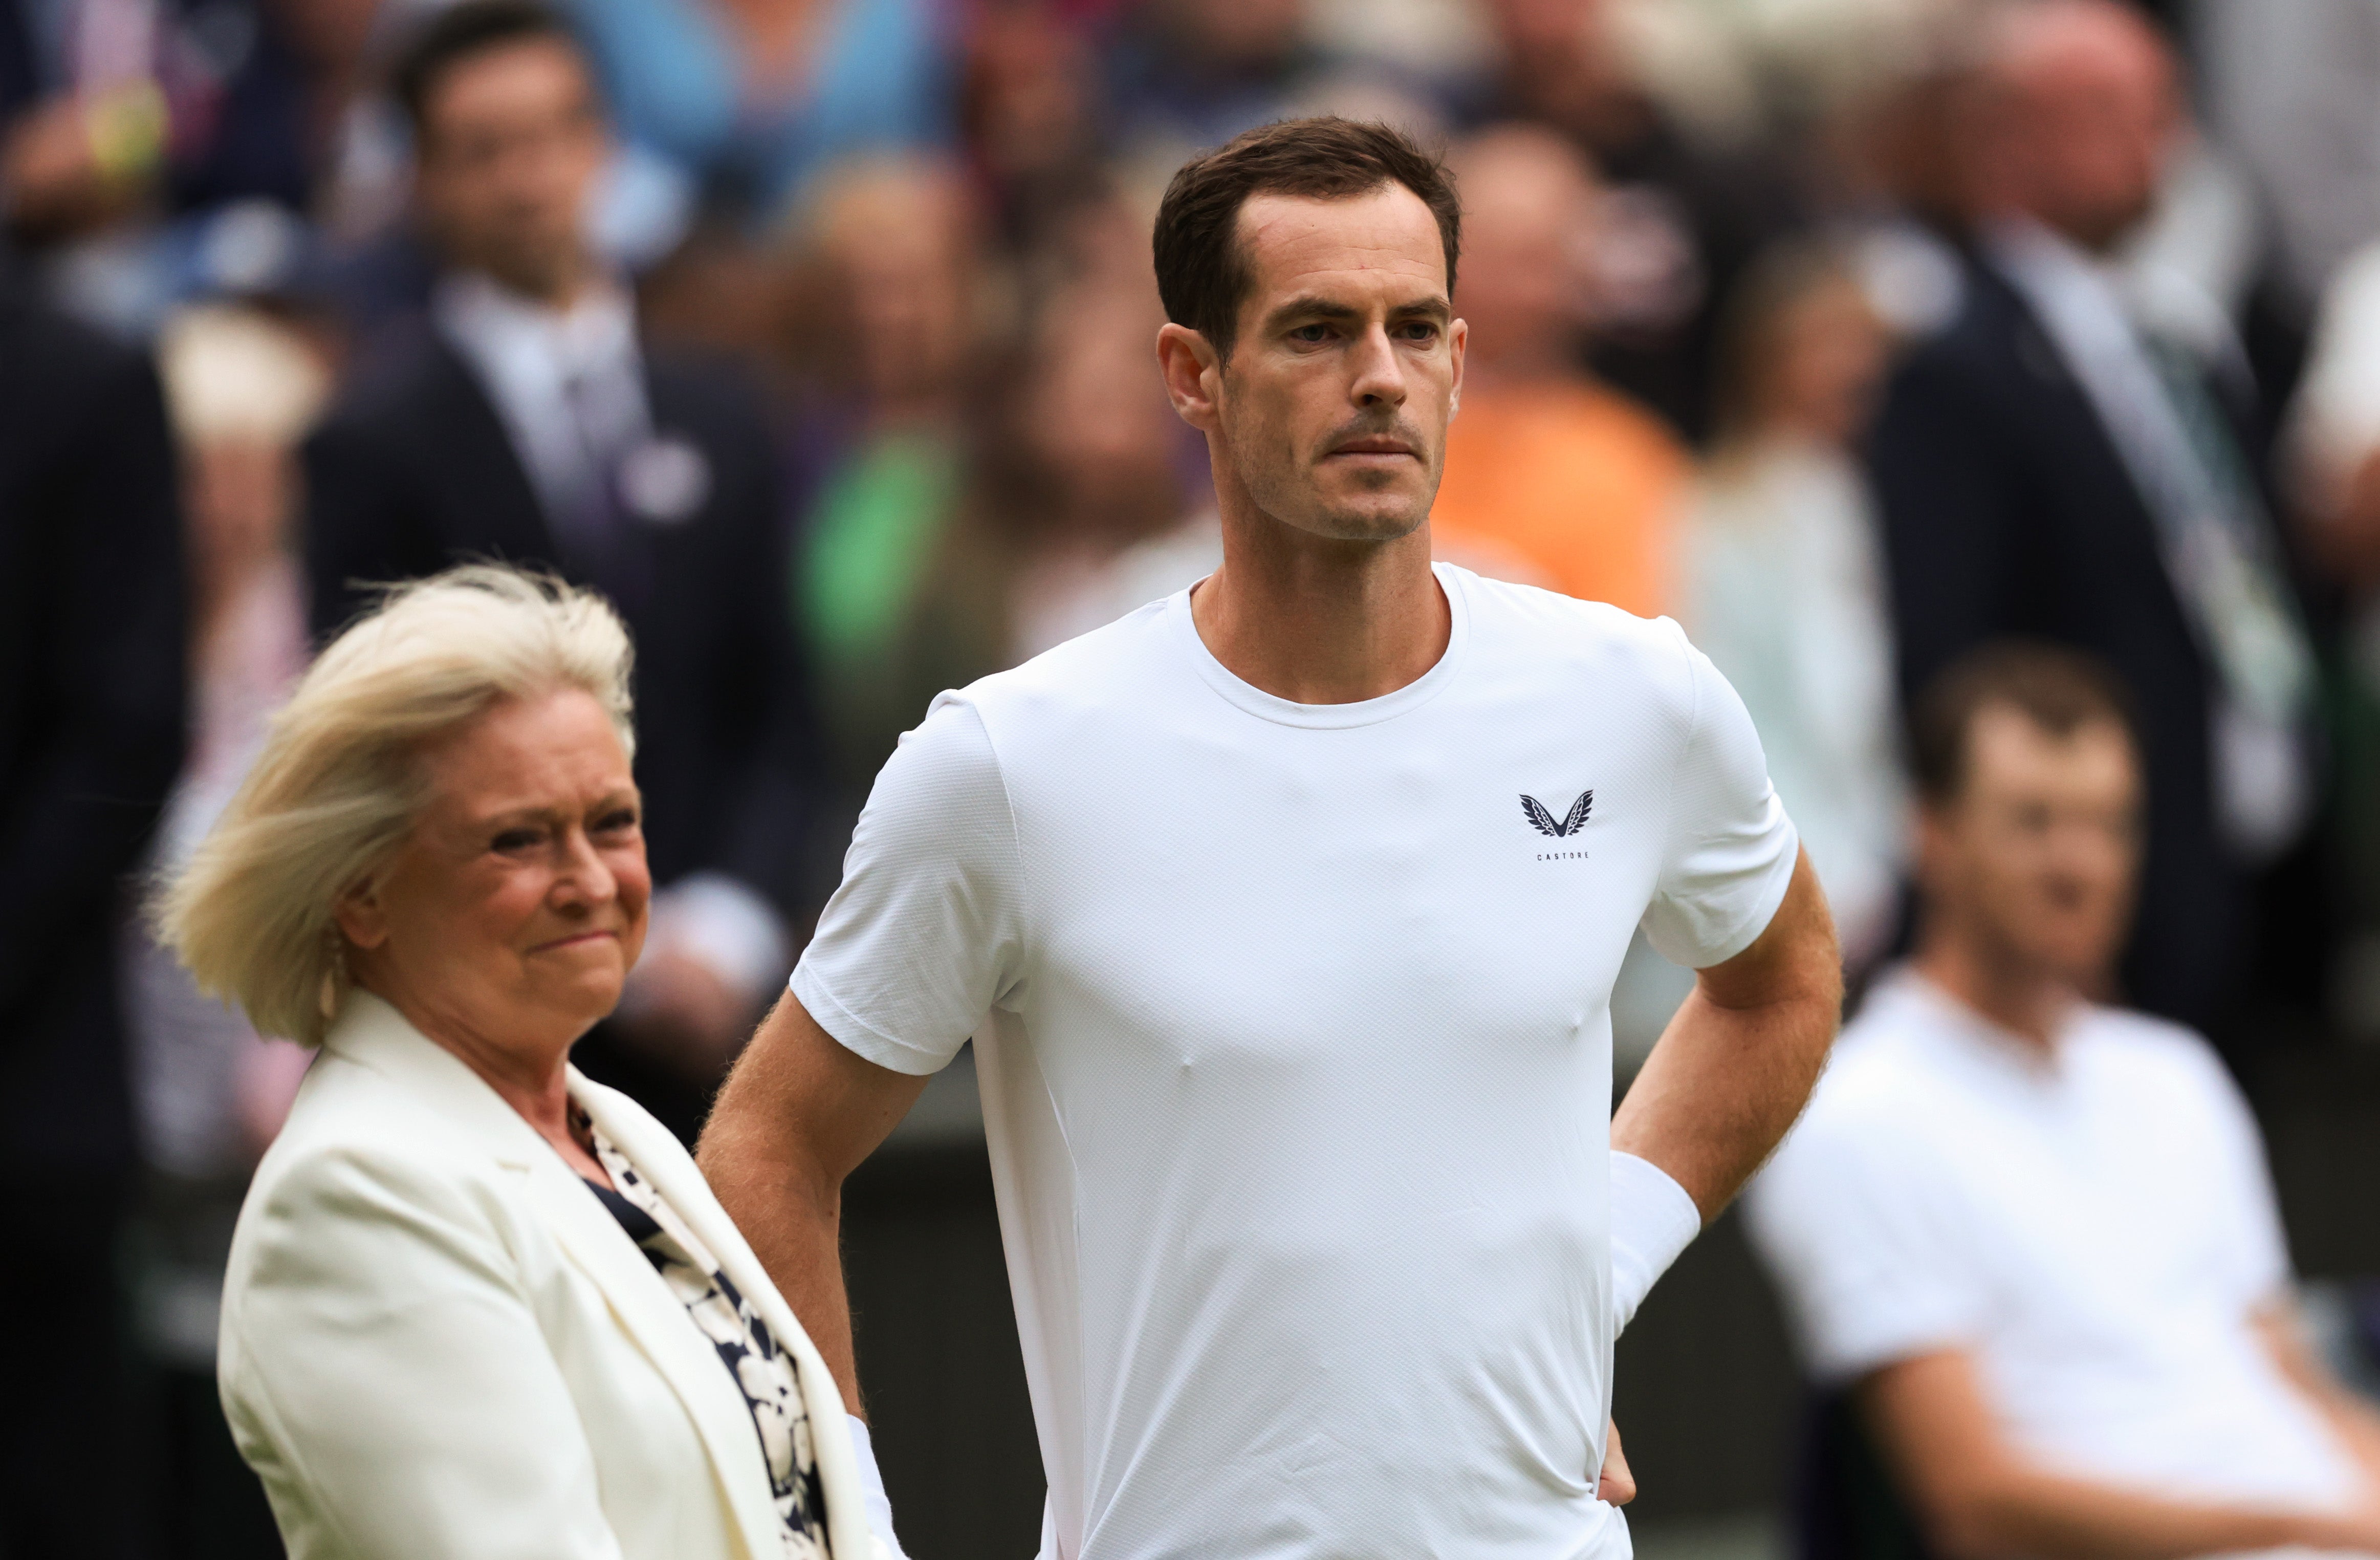 Andy Murray was interviewed by the returning Sue Barker on Centre Court